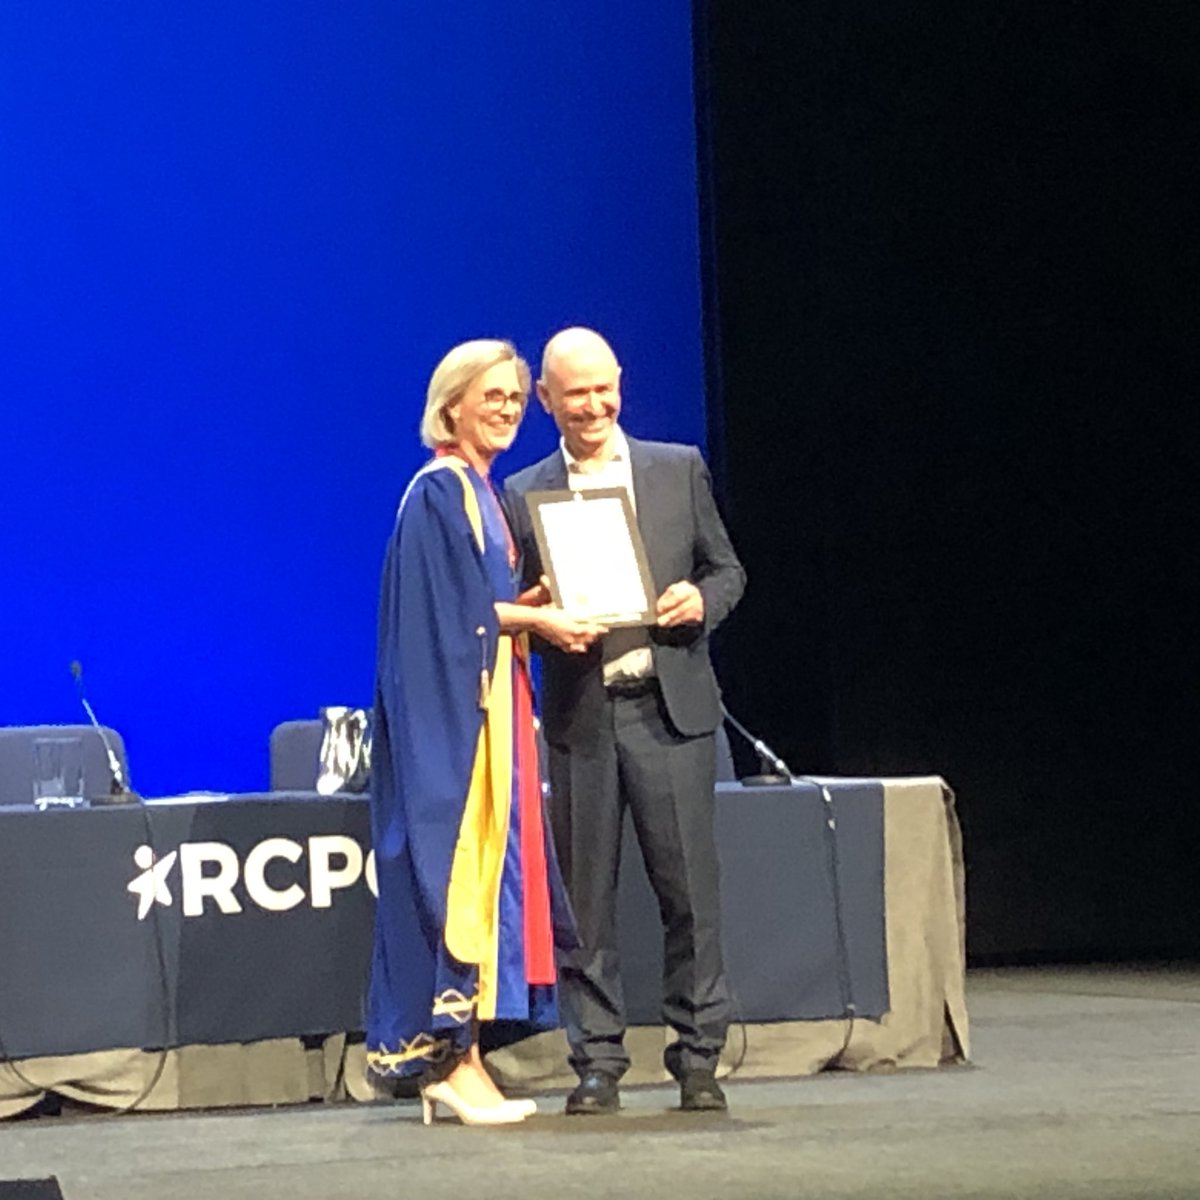 Many congratulations @PeterLachman wonderful to see you celebrated by @RCPCHtweets #RCPCH24